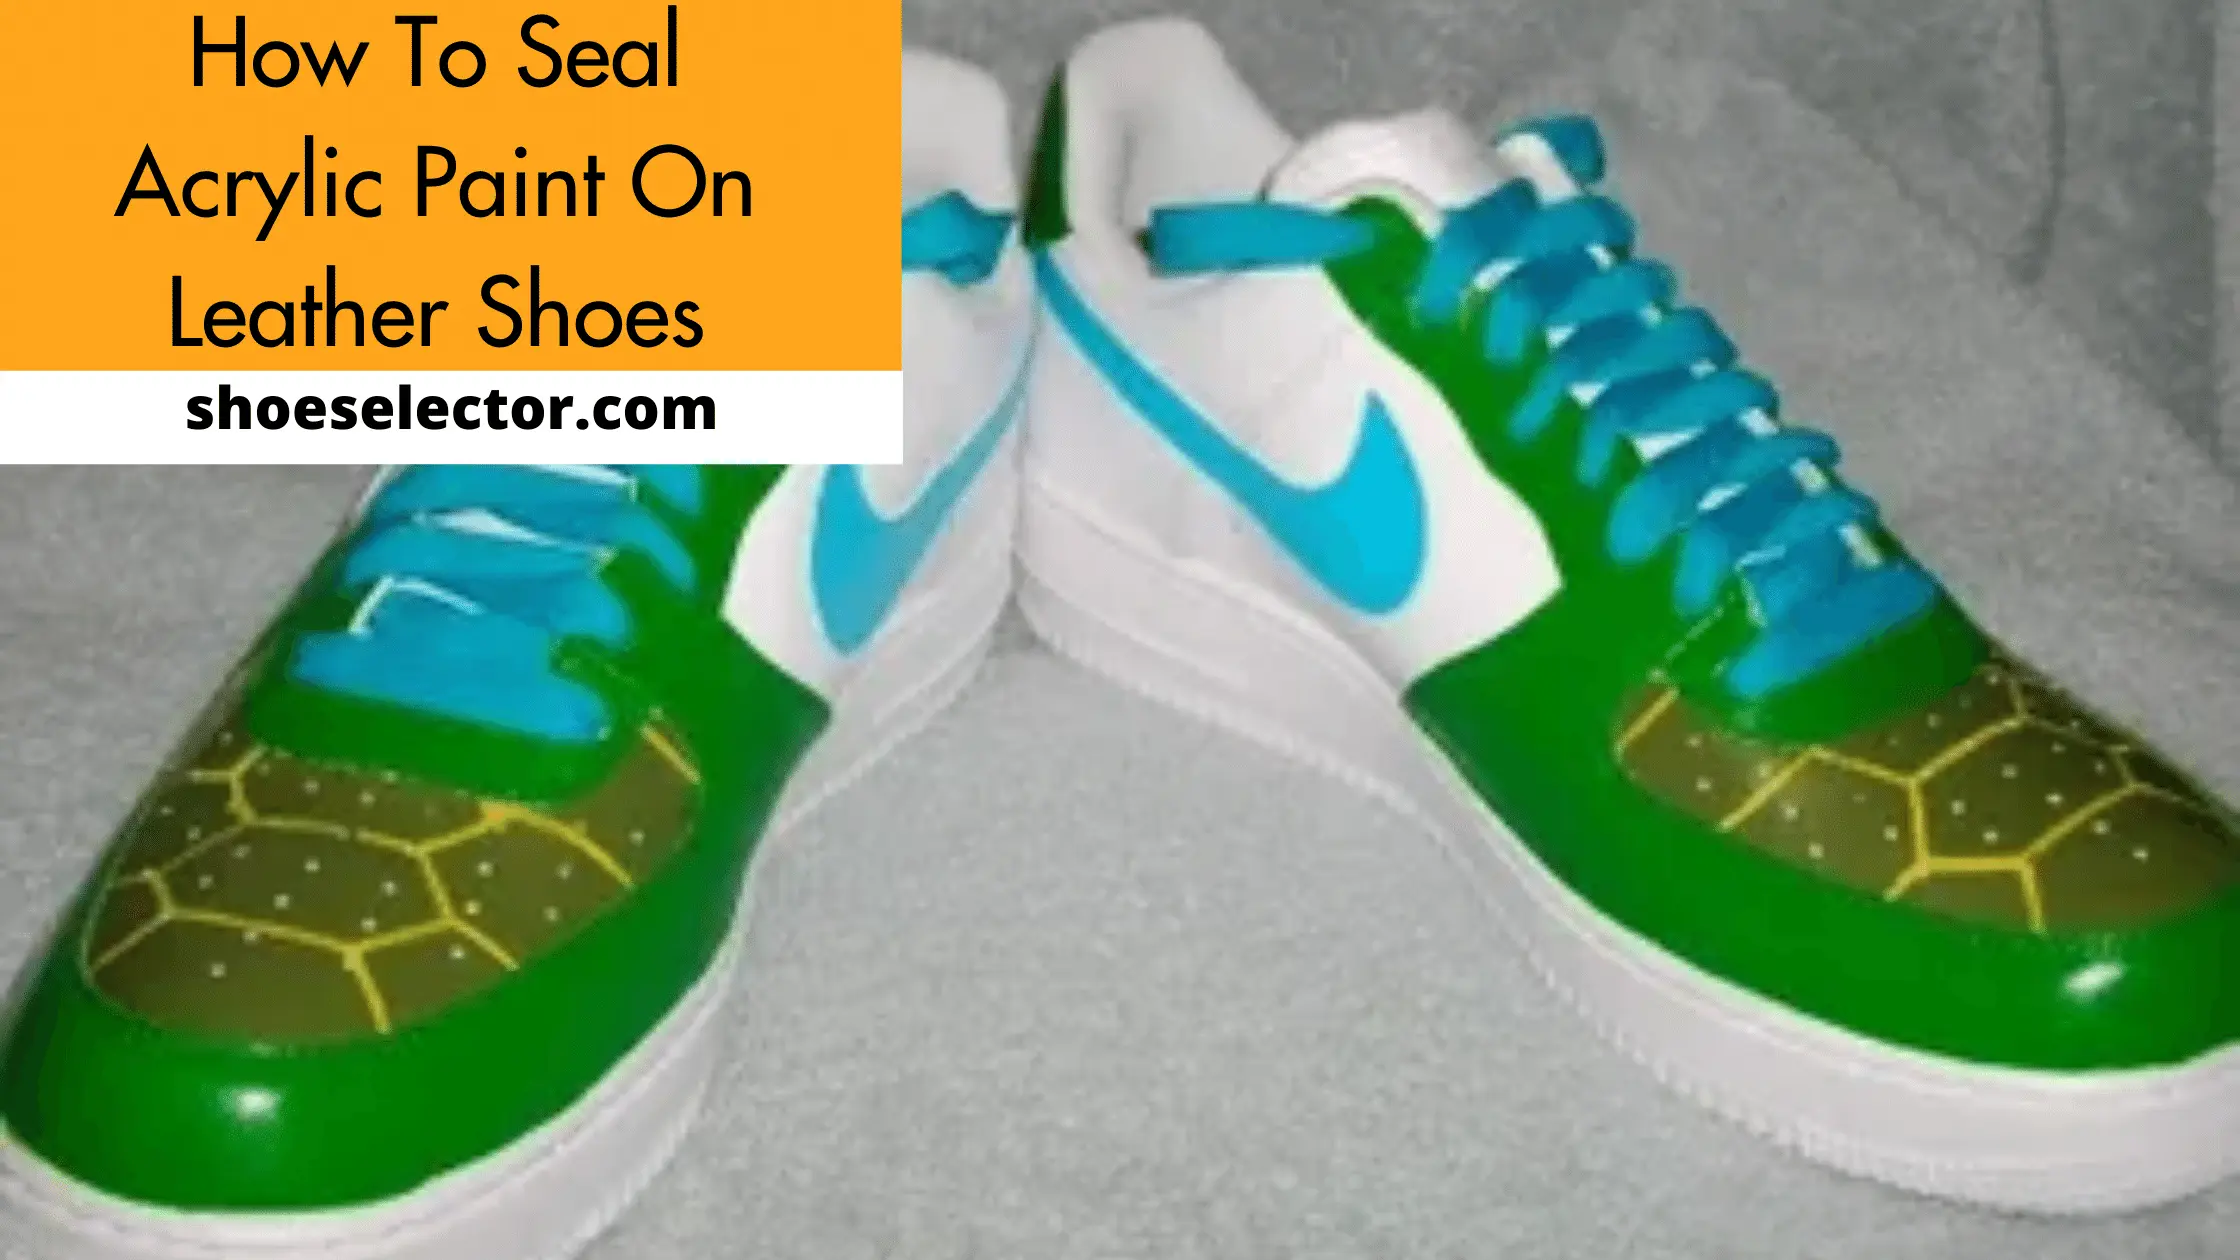 How To Seal Acrylic Paint On Leather Shoes? - Easy Guide